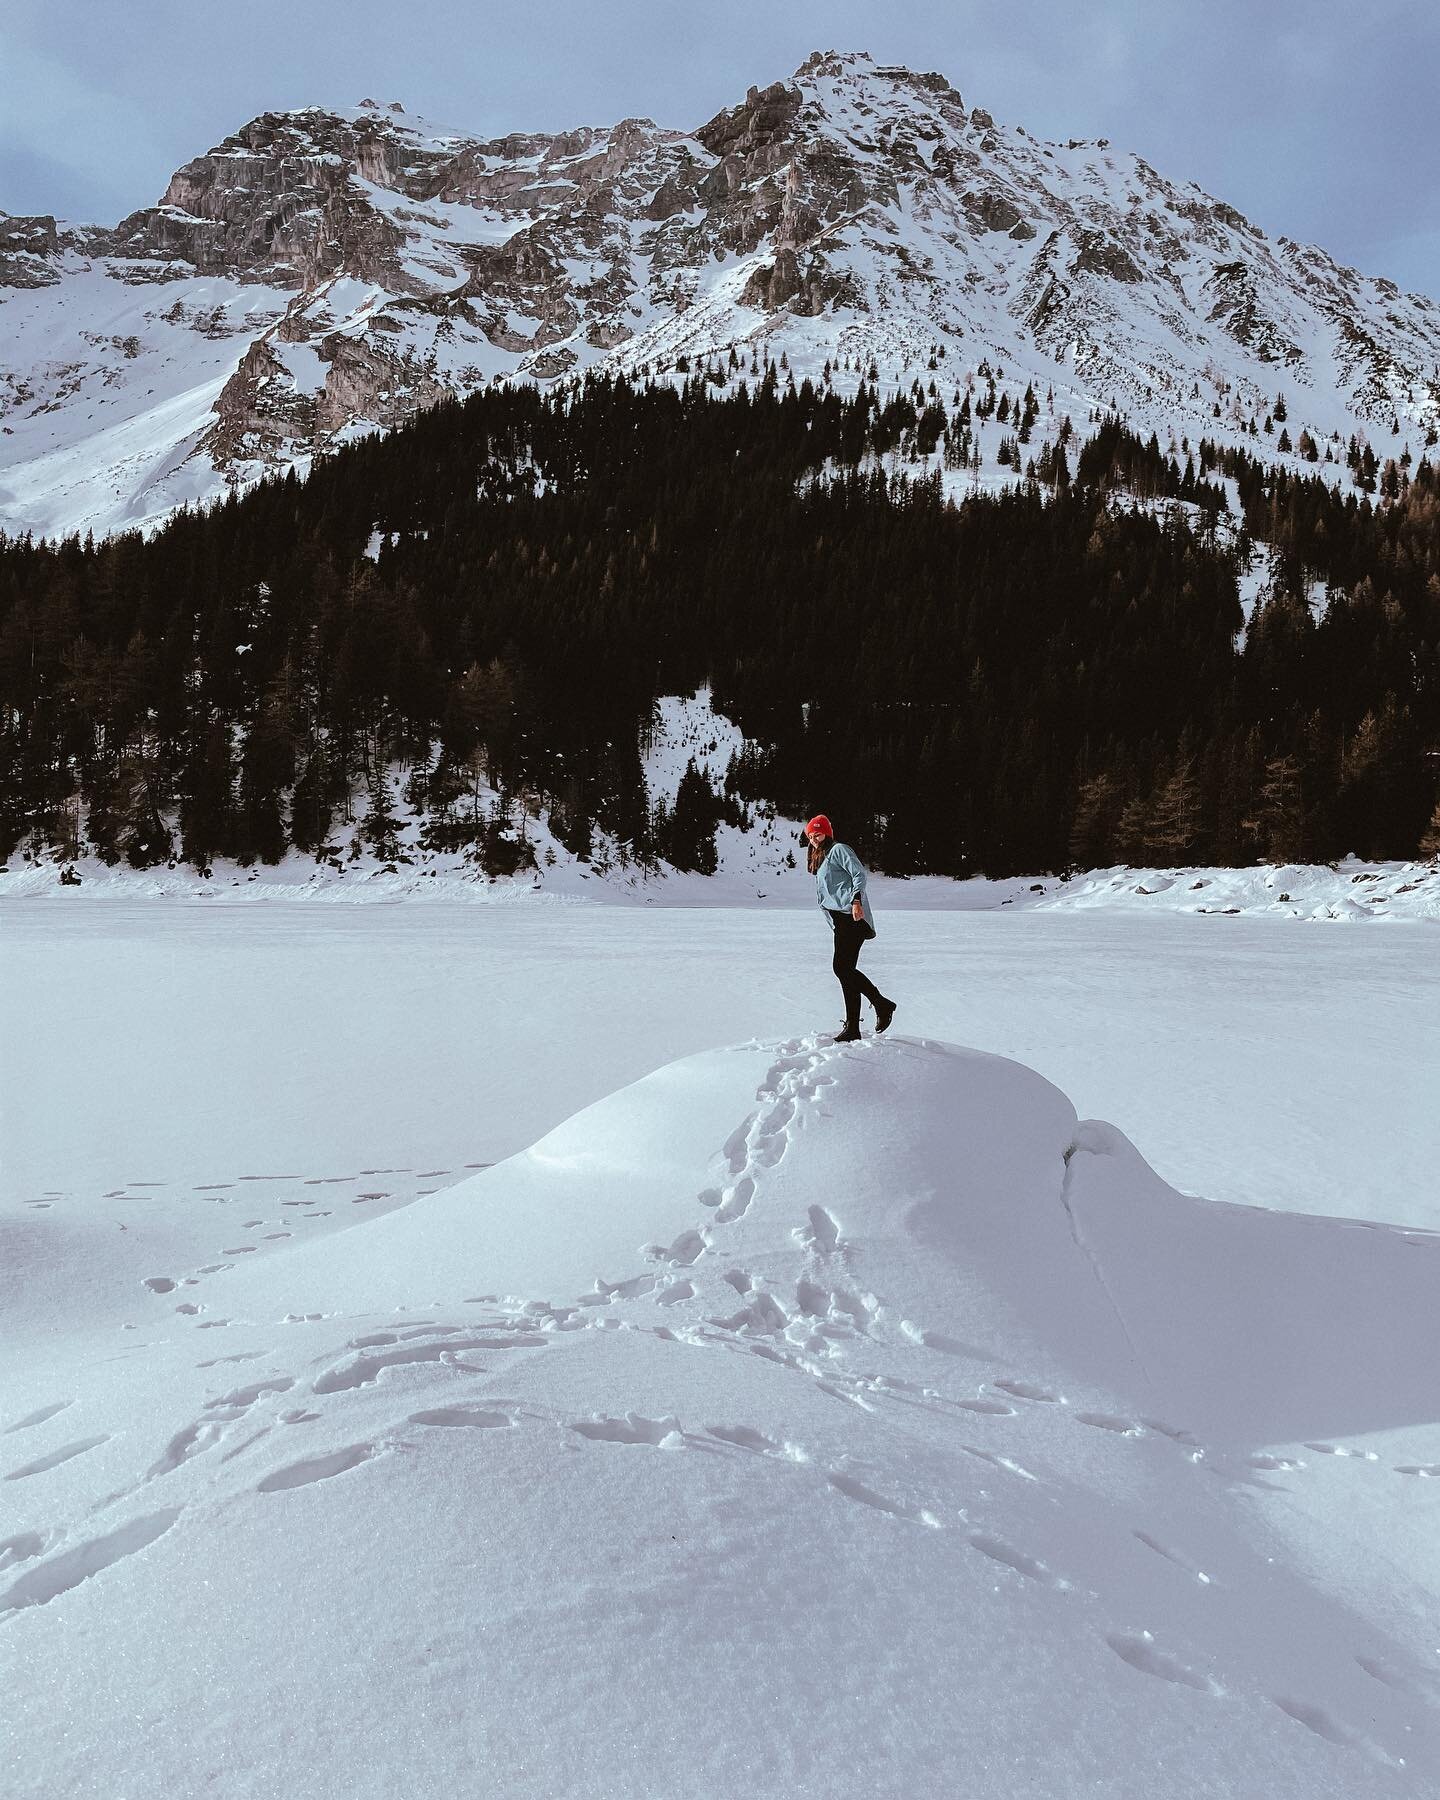 Everywhere the snow surrounds you and melts your troubles away 💃🏽⠀
⠀⠀⠀⠀
⠀⠀⠀⠀
⠀⠀⠀⠀
⠀⠀⠀⠀
#explore #blogger_at #blogger_de #austria #tirol #igersaustria #travelblogger #travel #tyrol #traveleurope #frozenlake #visittirol #neverstopexploring #wipptal #